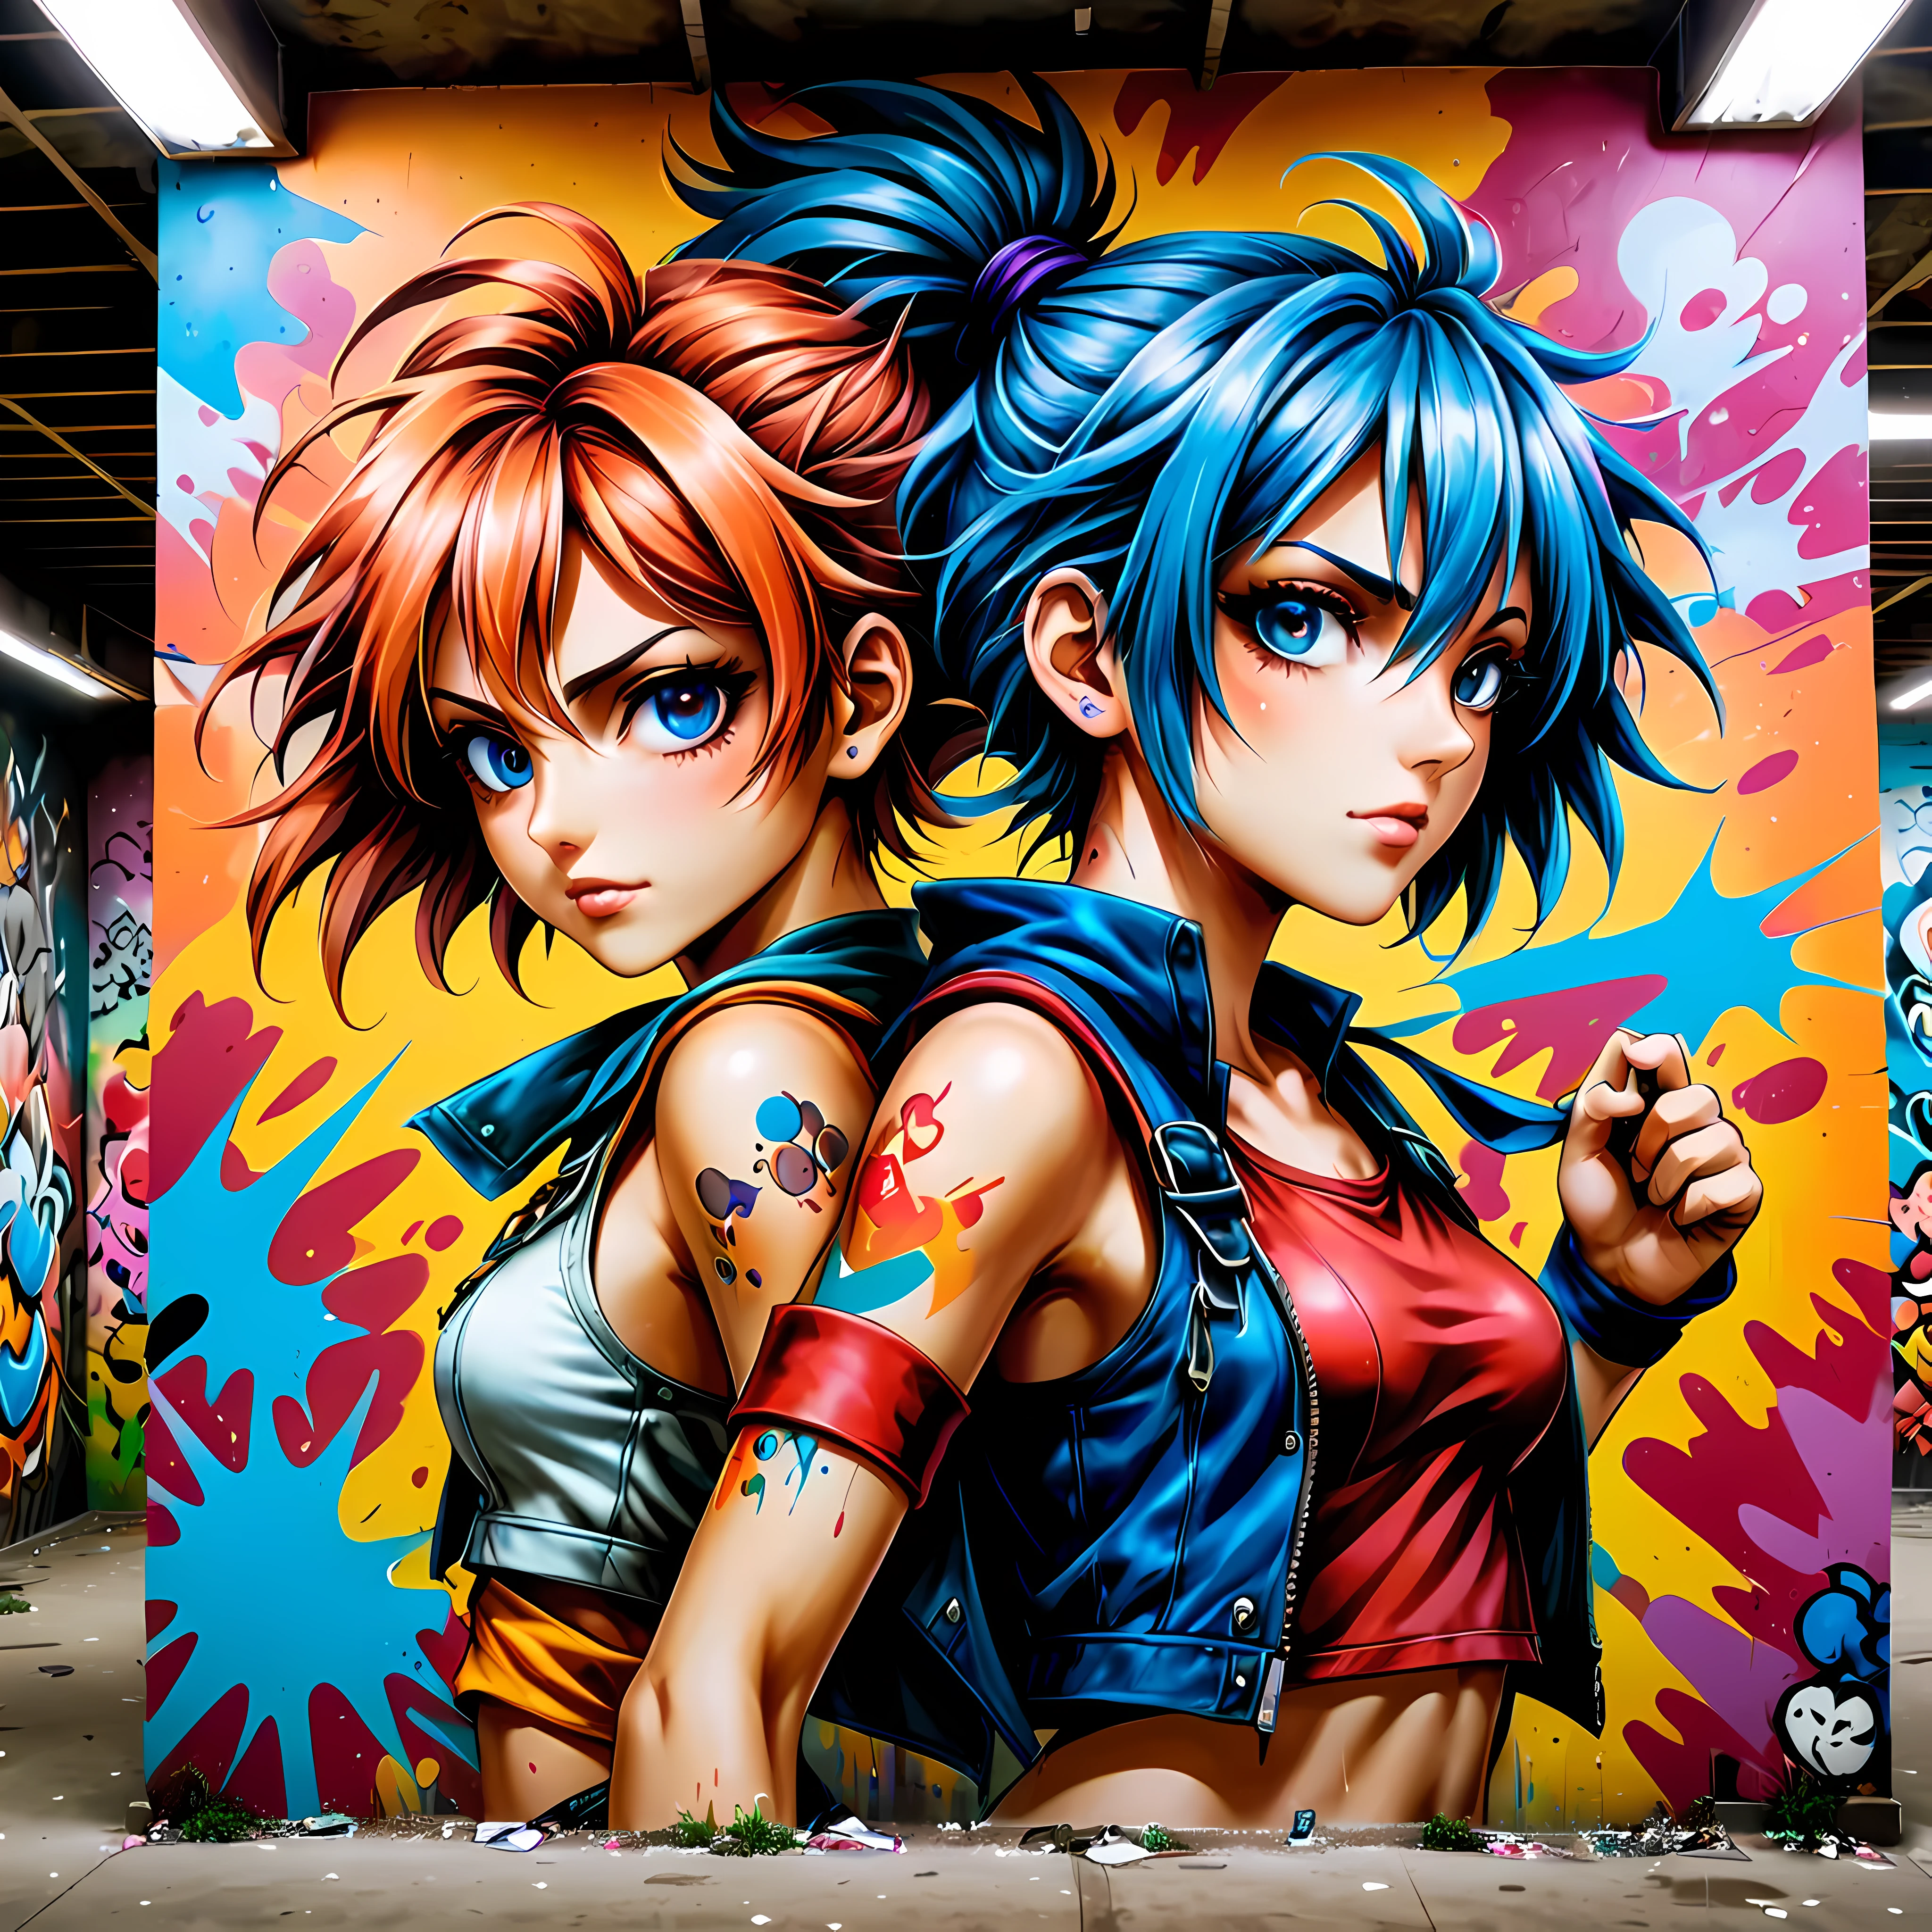 A mural of graffiti comic in a building wall.

(best quality,realistic),(close-up),(anime artwork:1.1),(mural),(chrono cross style:1.1),(90s anime style:1.1),(vibrant colors),(detailed characteragical atmosphere),(soft lighting),(nostalgic),(dynamic poses),(expressive eyes:1.1),(beautiful hairstyles),(playful expressions),(whimsical background),(eye-catching),(colorful composition)